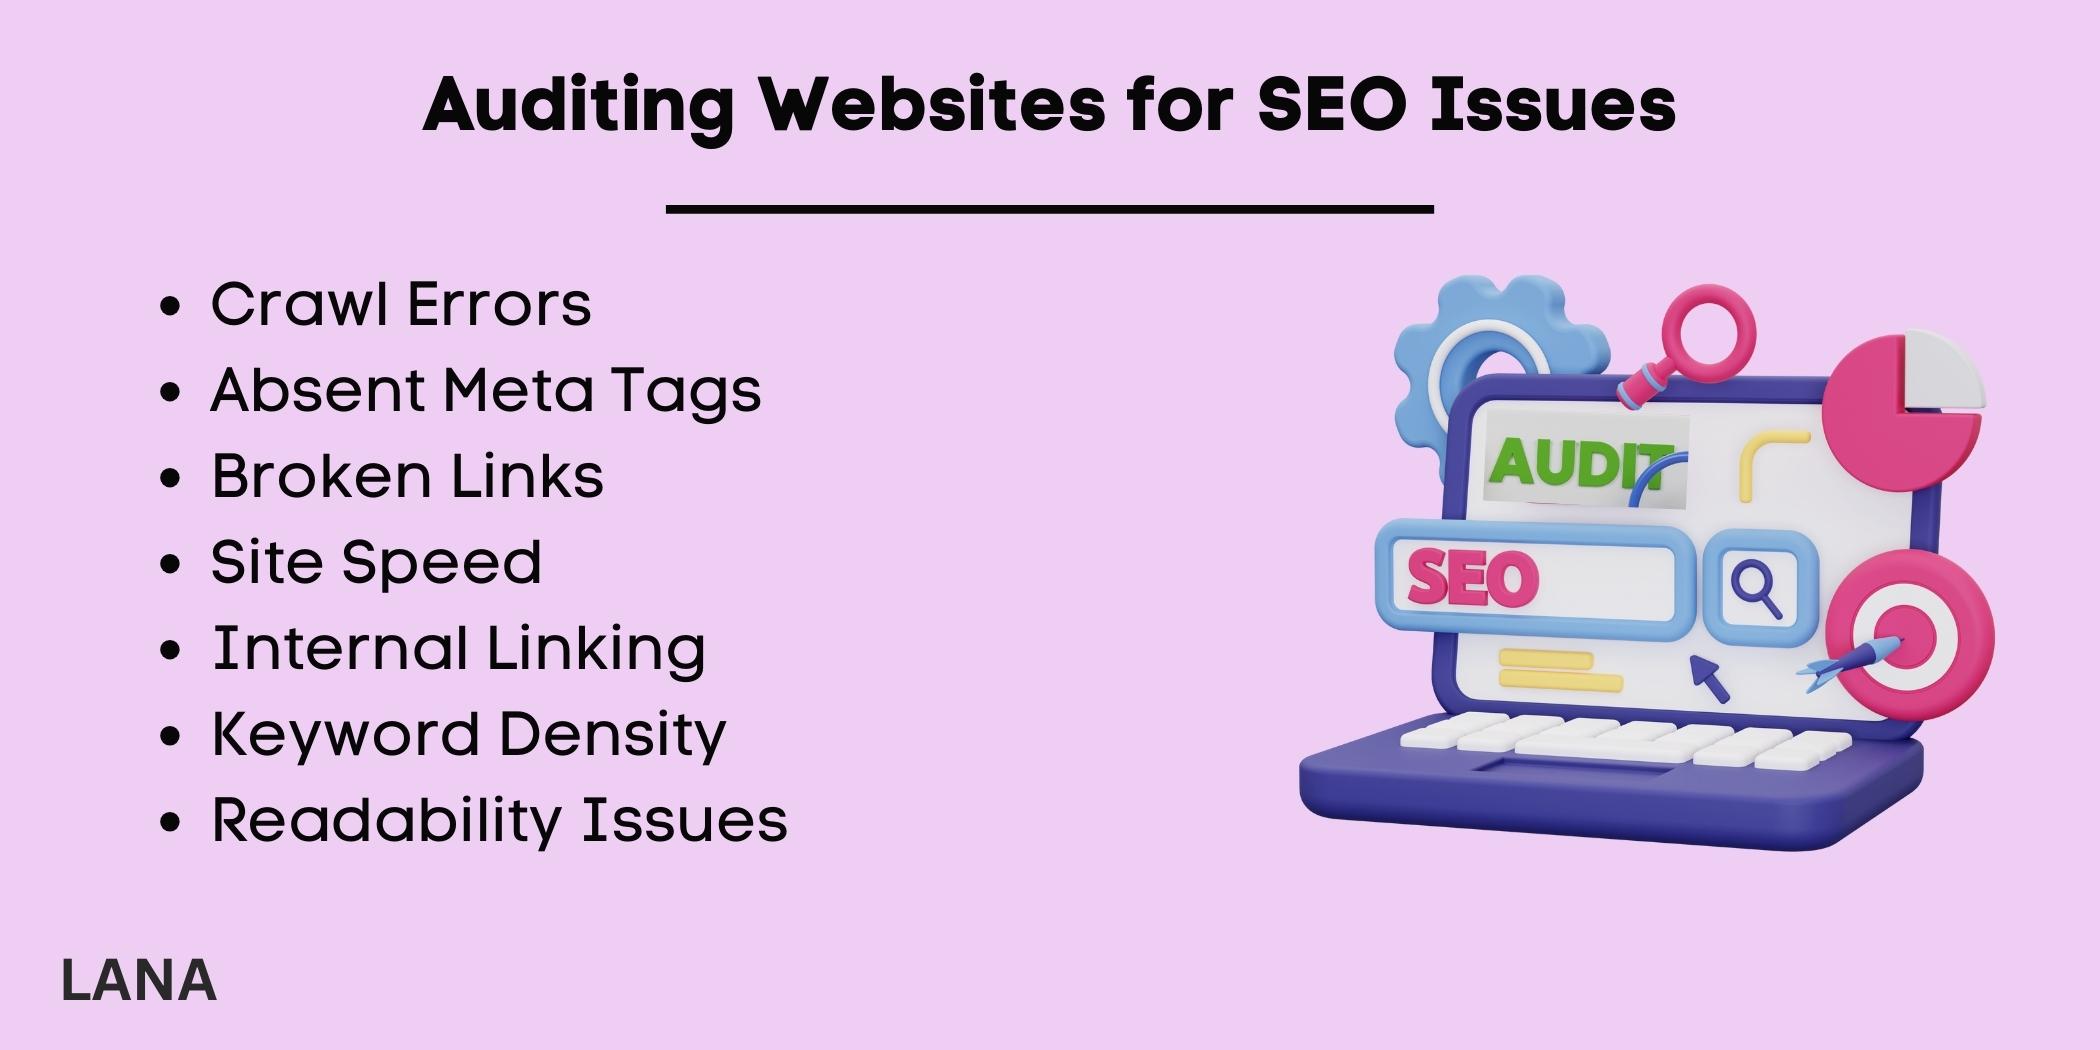 Auditing Websites for SEO Issues